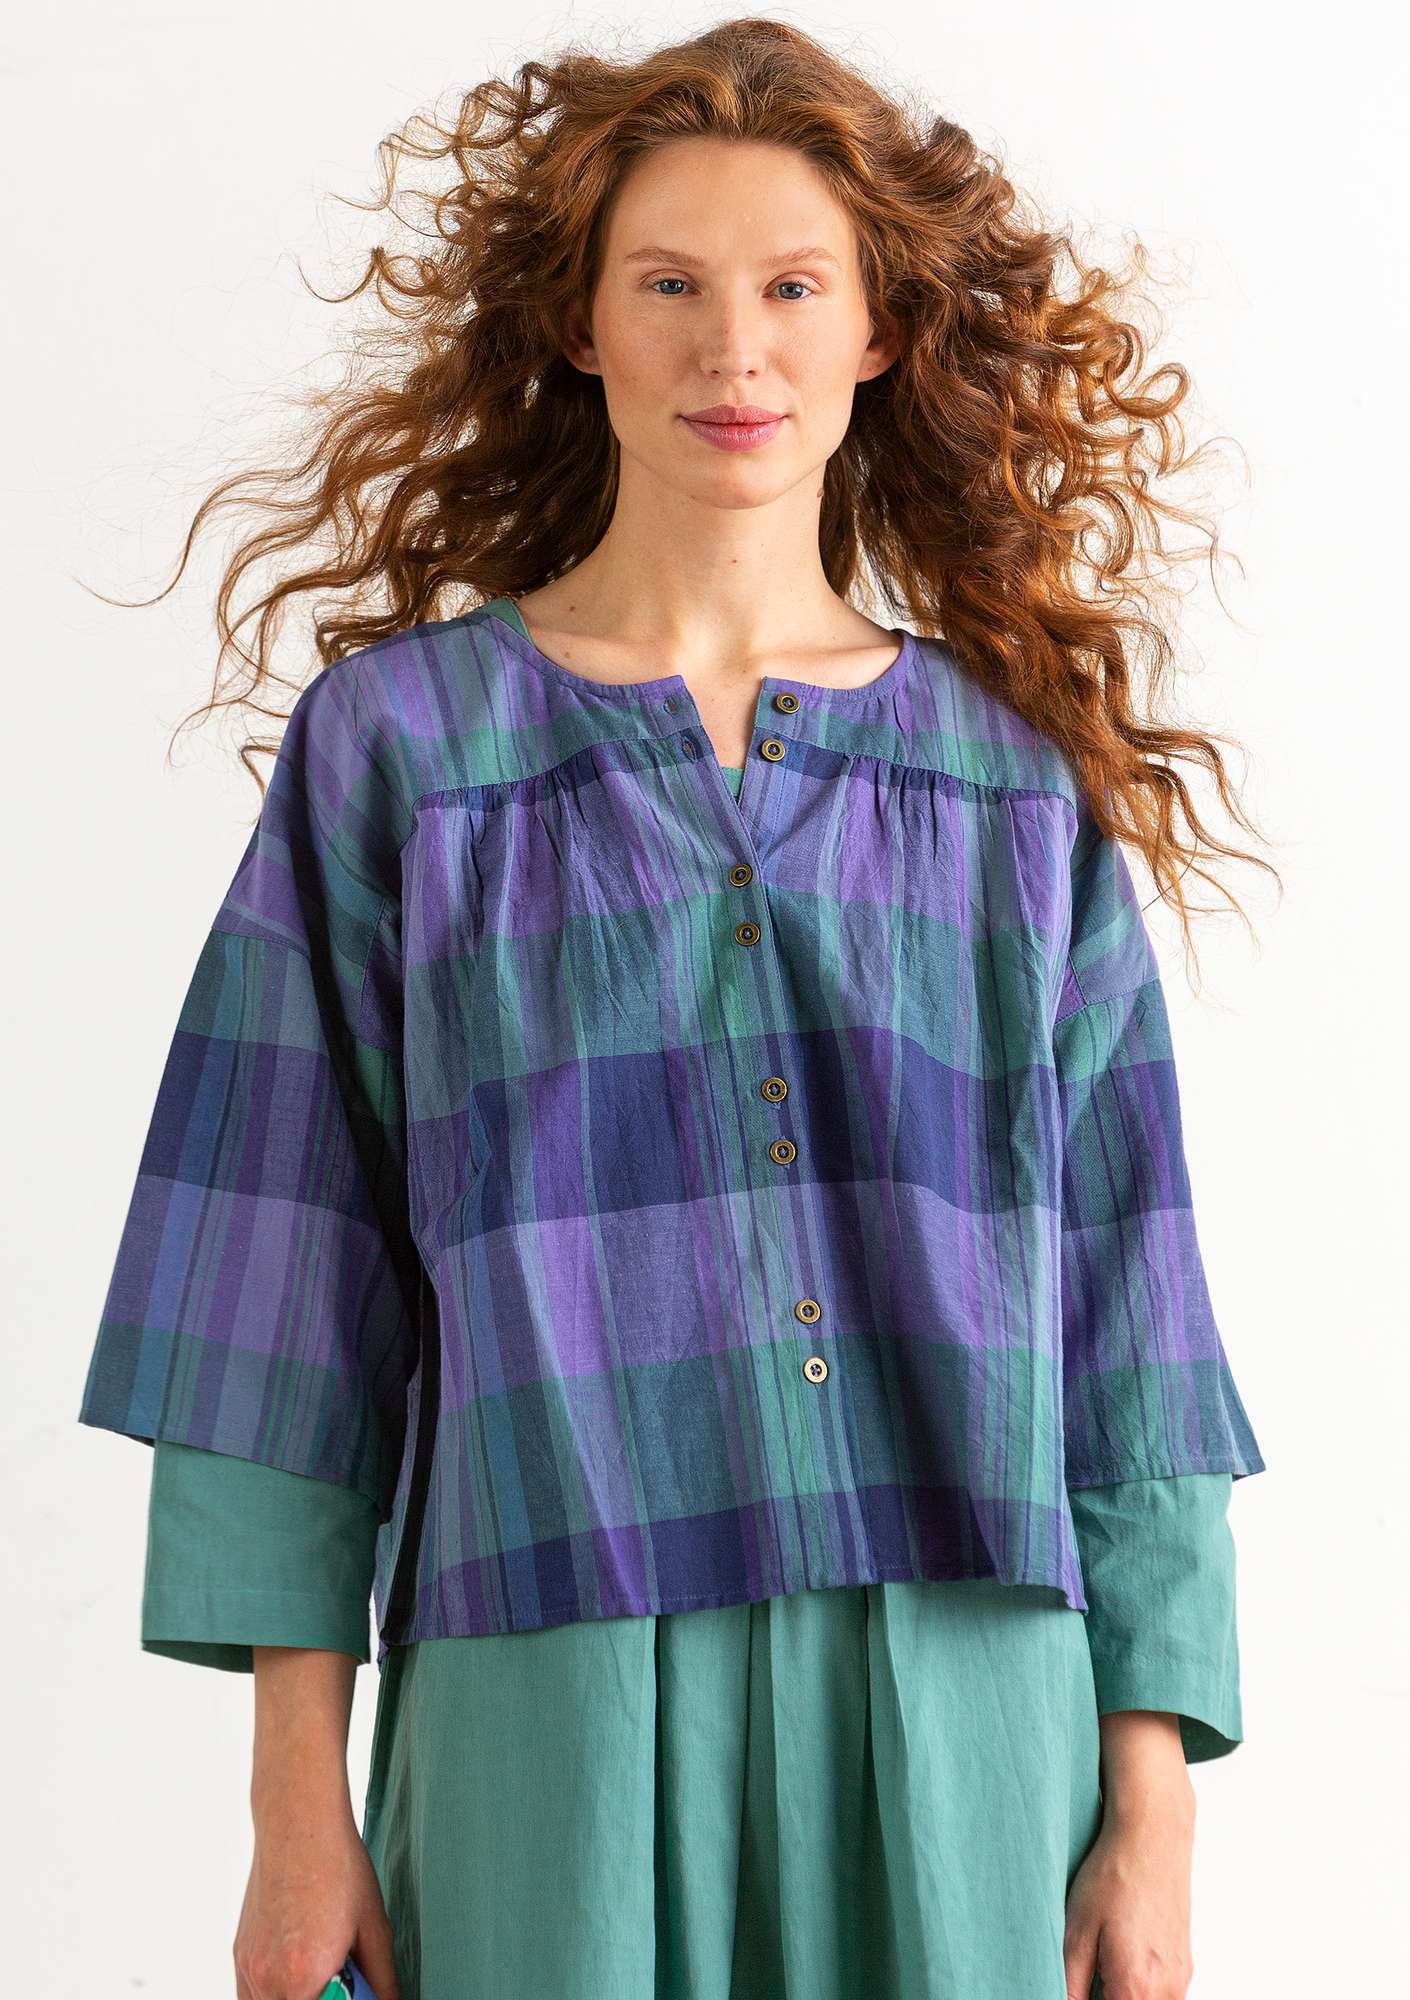 Bluse Rut midnight blue/patterned